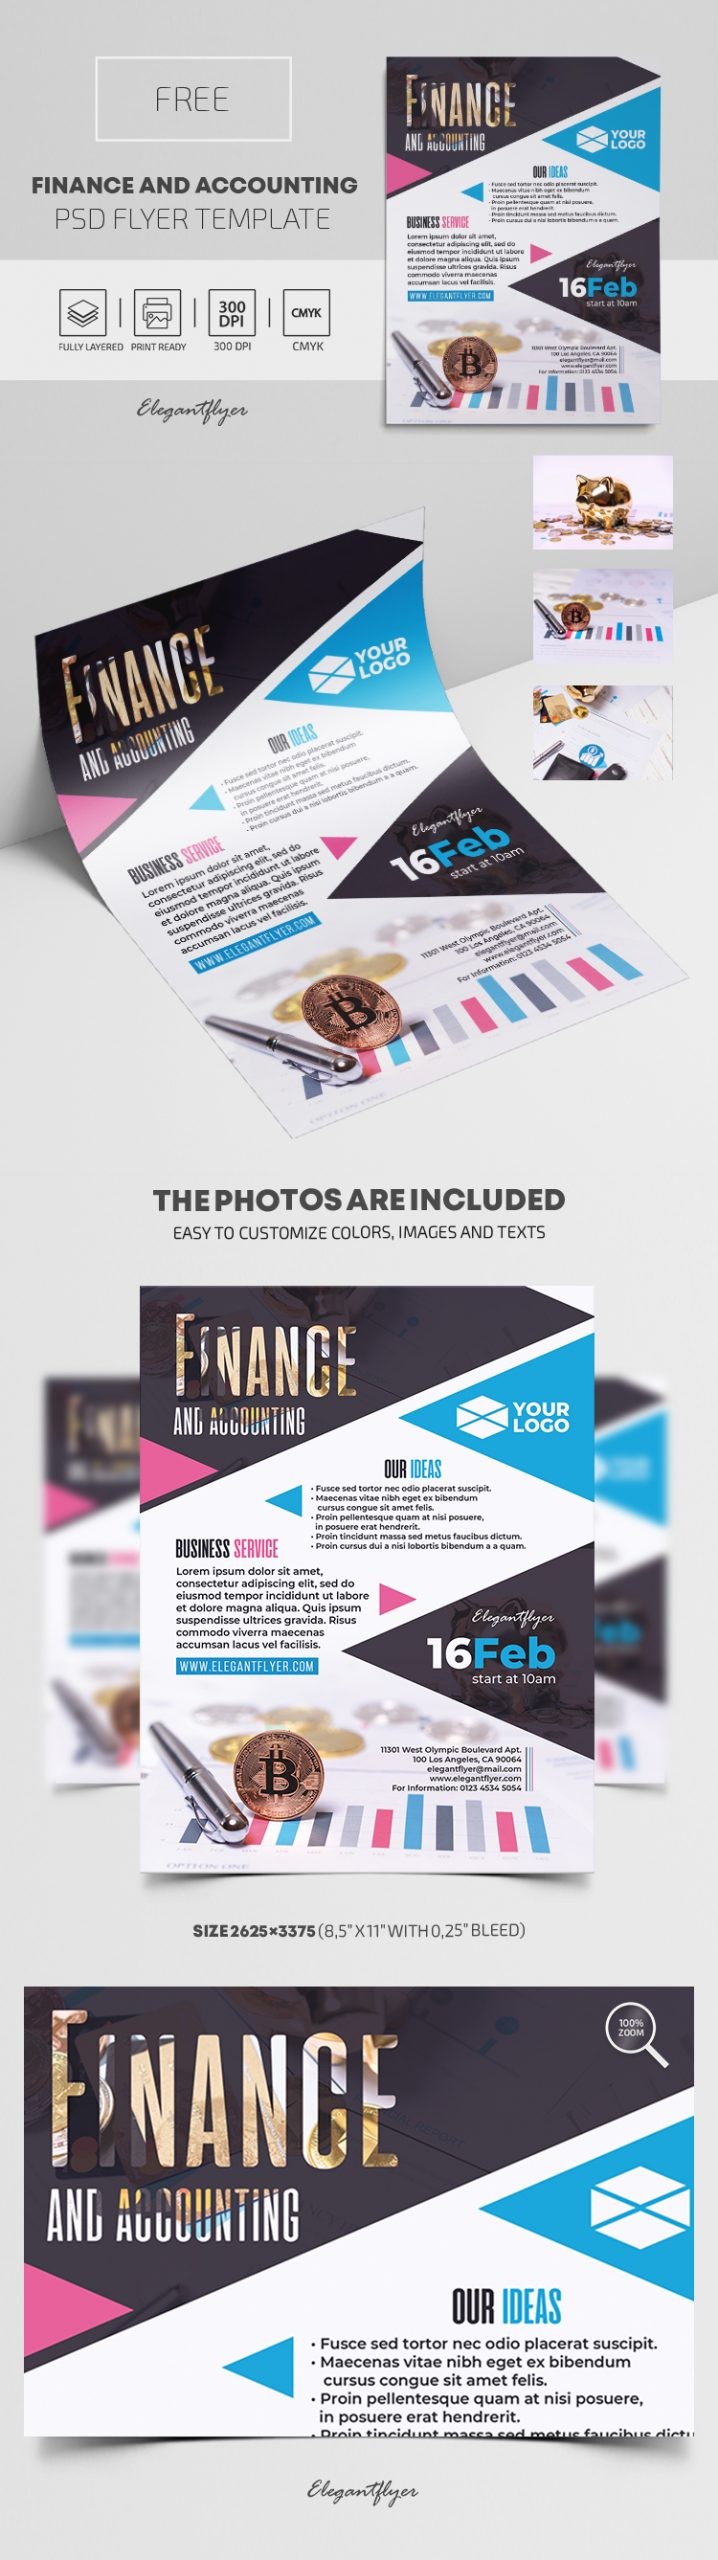 Finance and Accounting by ElegantFlyer